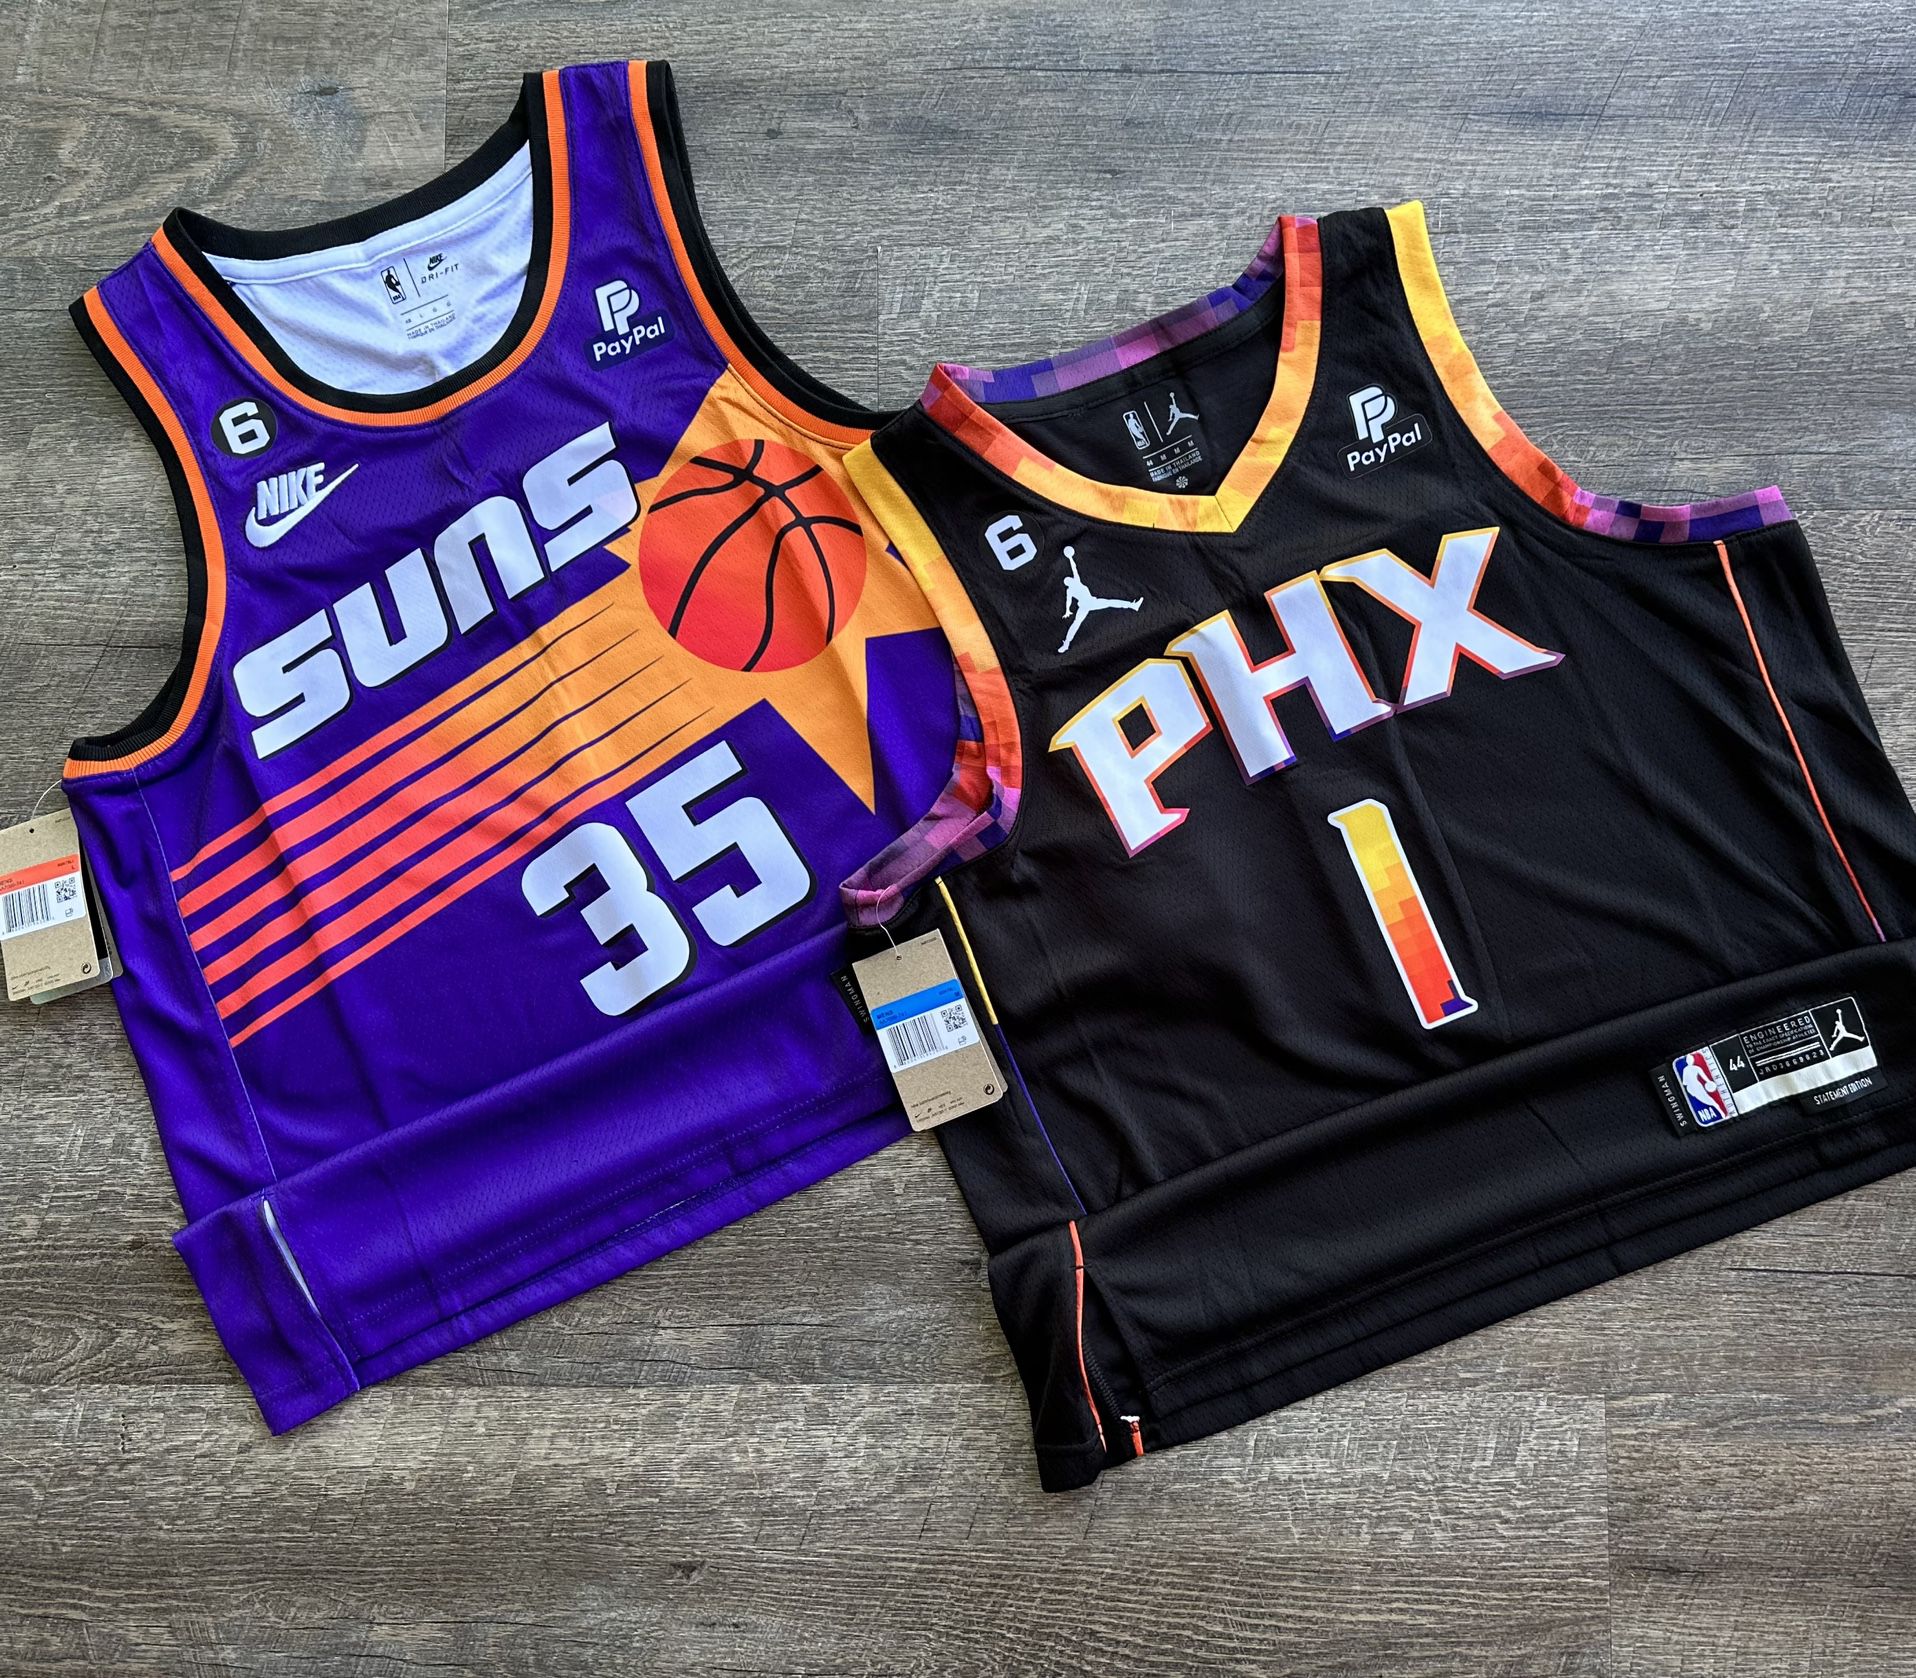 Suns Jersey Booker And Durant XXL XL L M S, TURQUOISE AND BLACK for Sale in  Gilbert, AZ - OfferUp